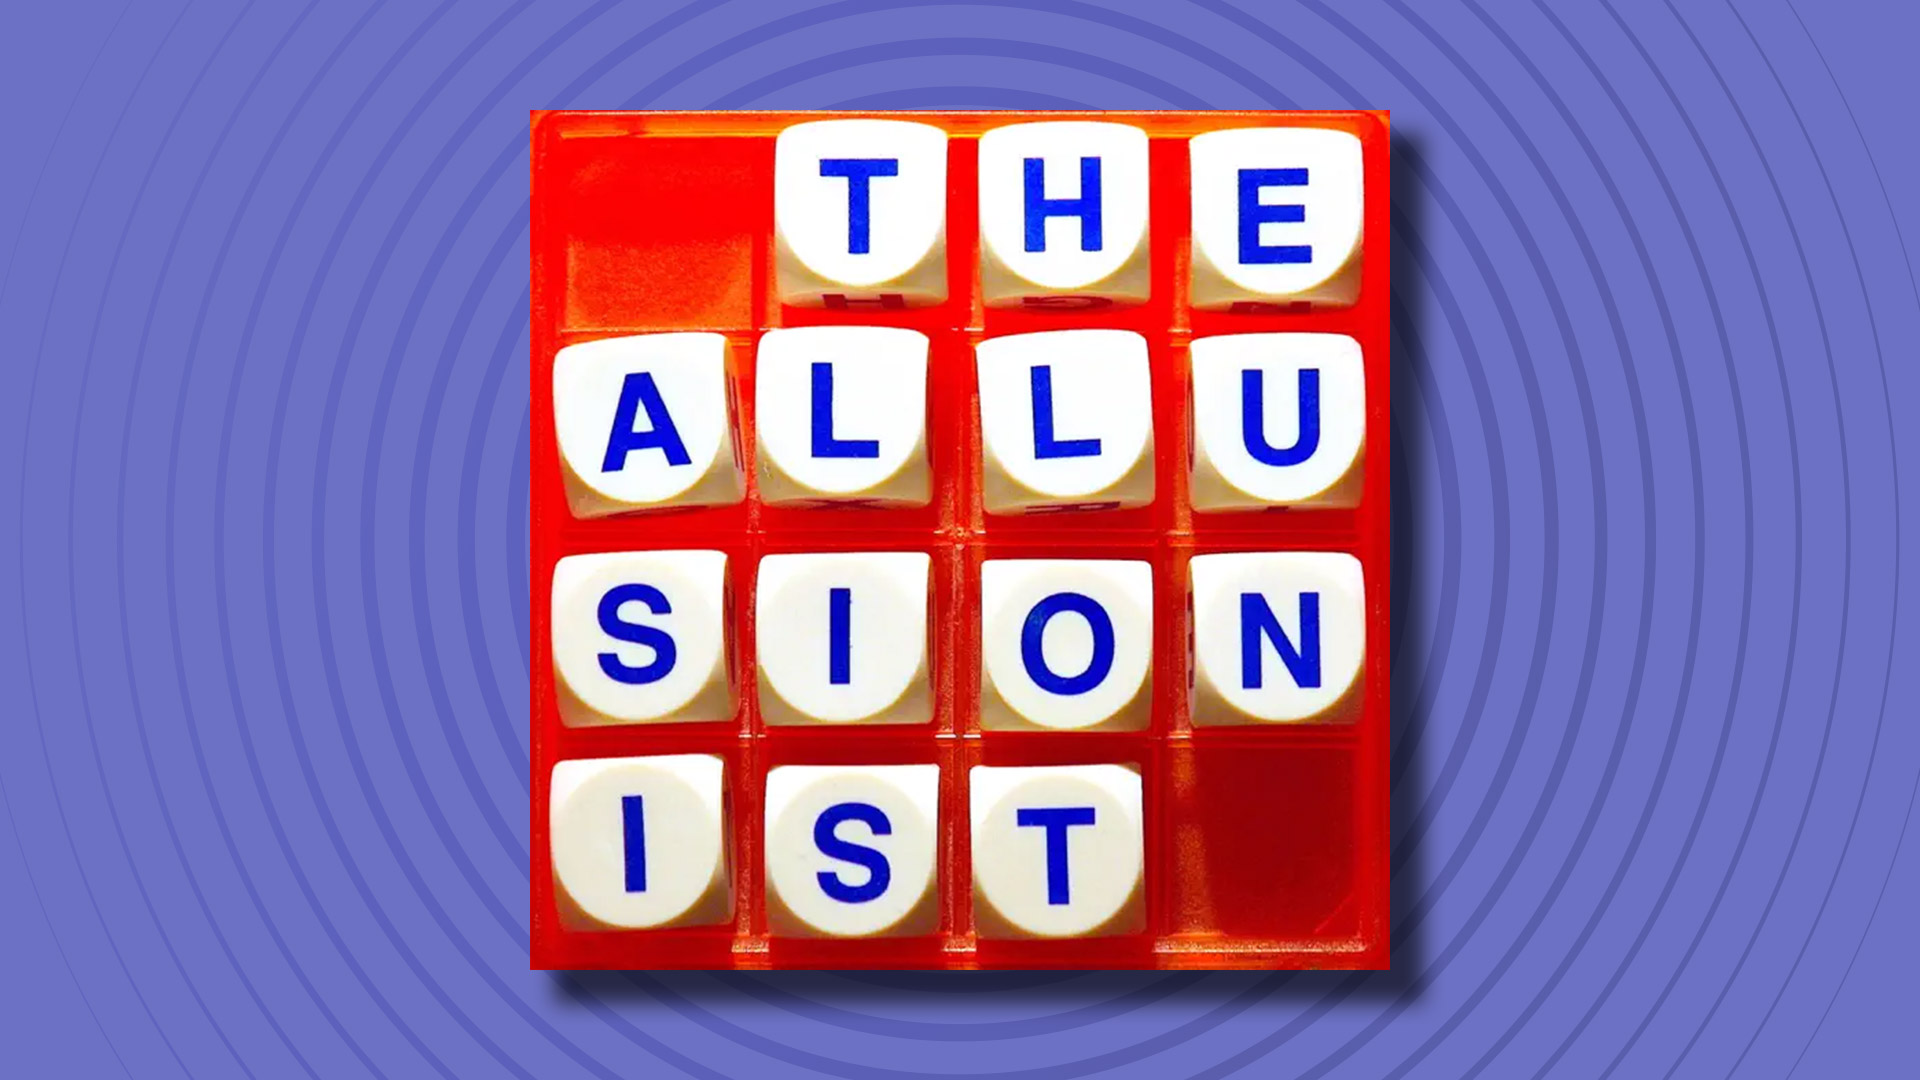 The logo of the Allusionist podcast on a purple background